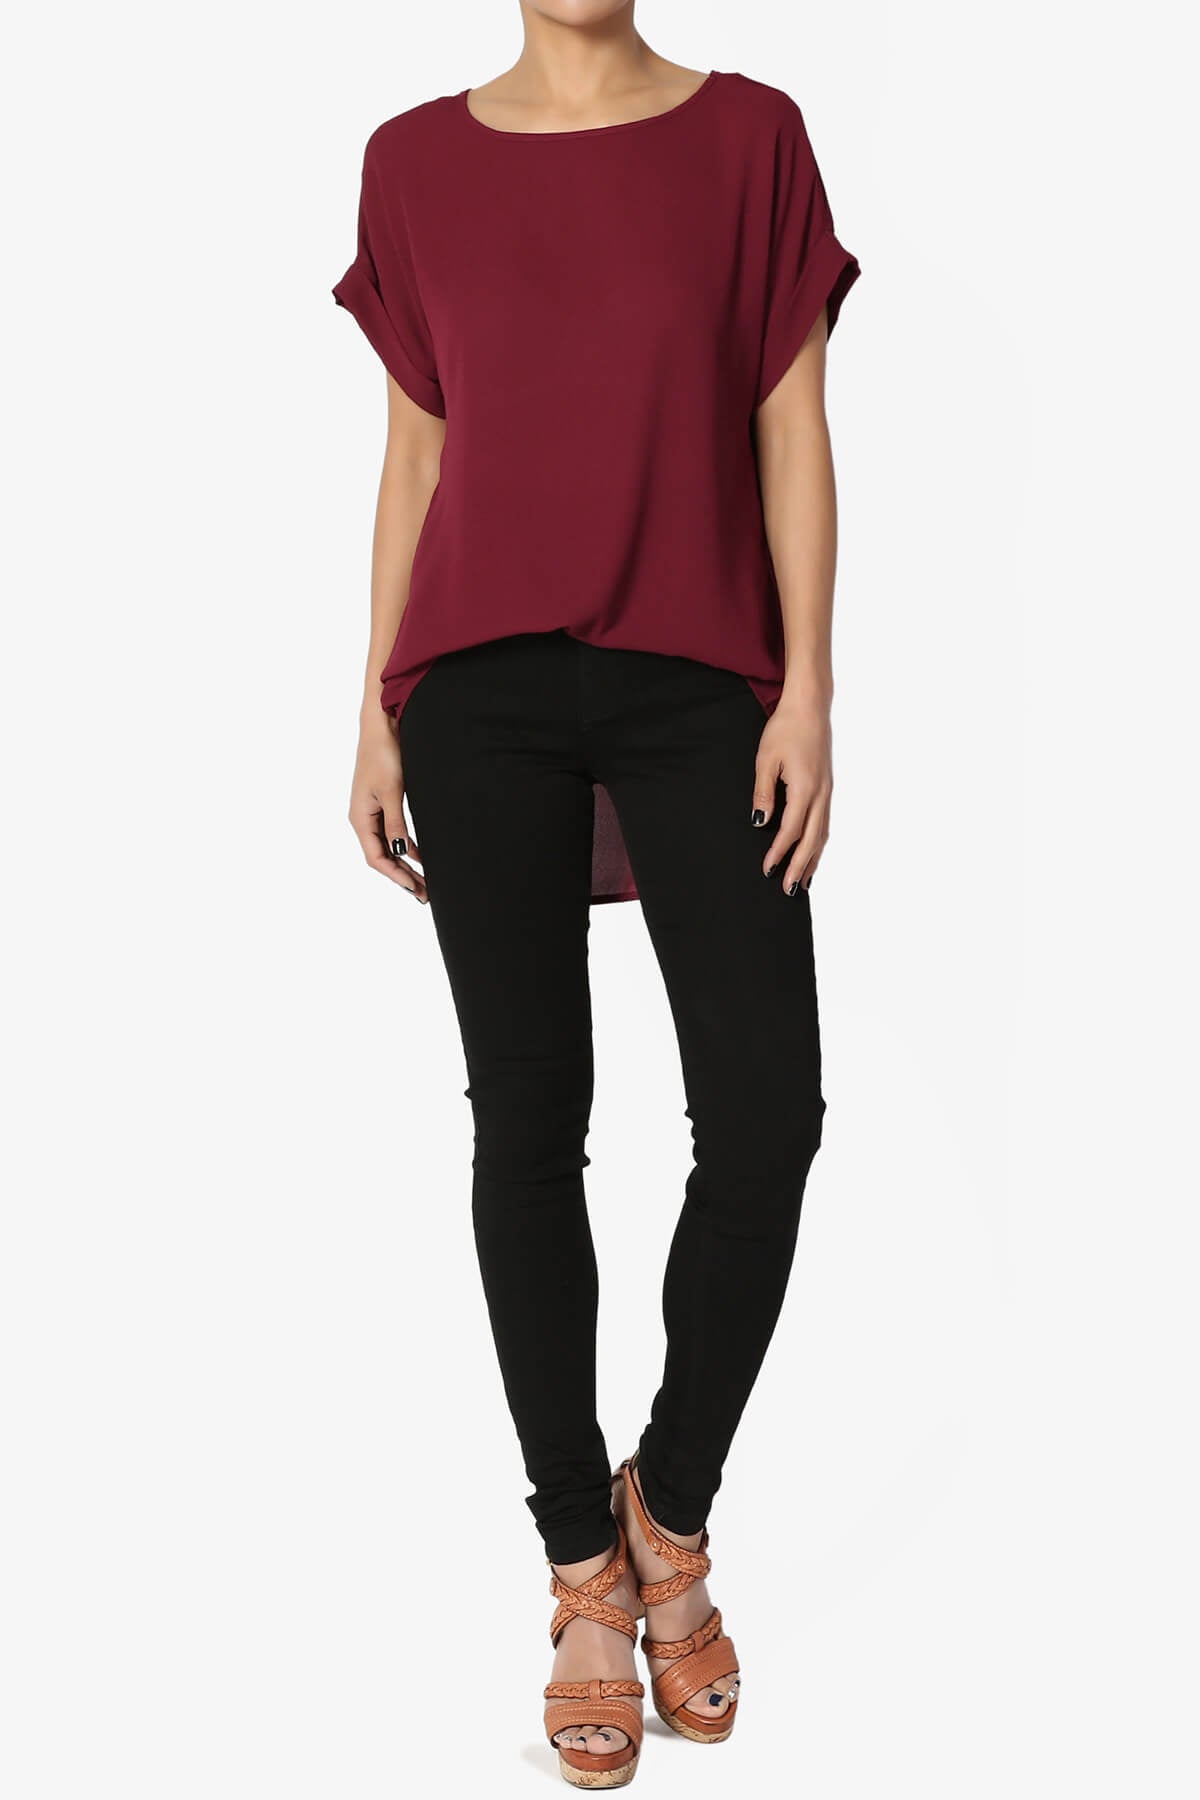 Load image into Gallery viewer, Juliette Boat Neck Chiffon Top BURGUNDY_6
